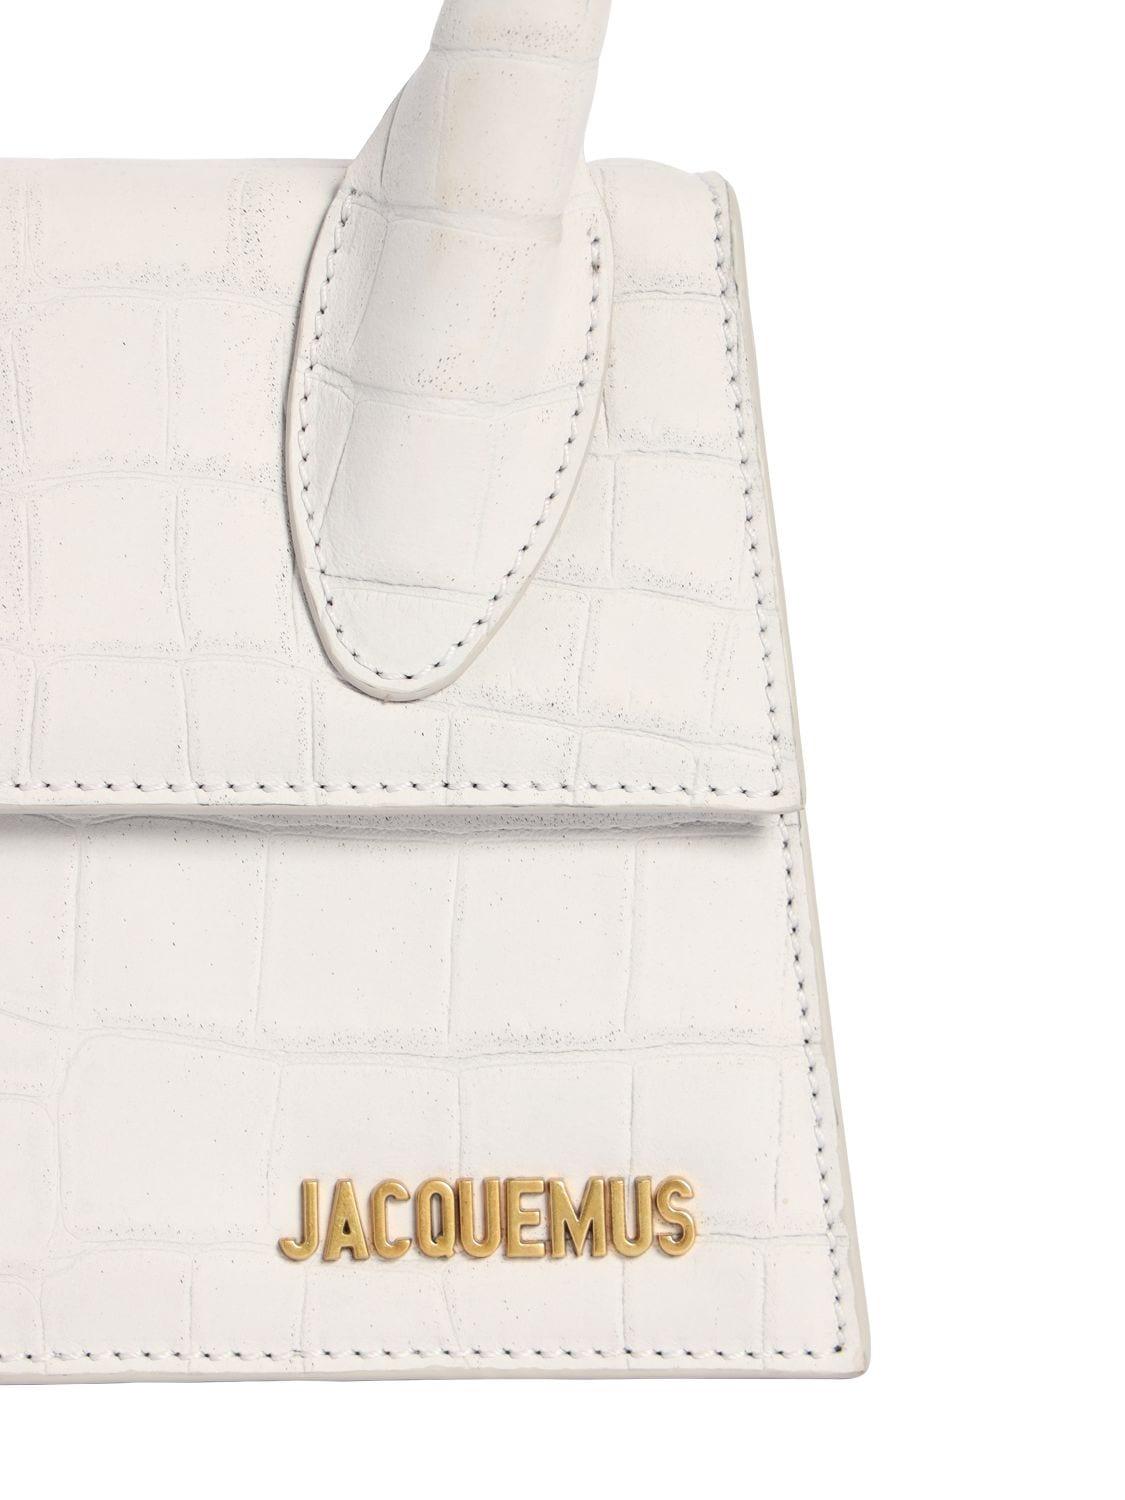 Jacquemus Leather Le Chiquito Moyen Croc Embossed Bag in White | Lyst